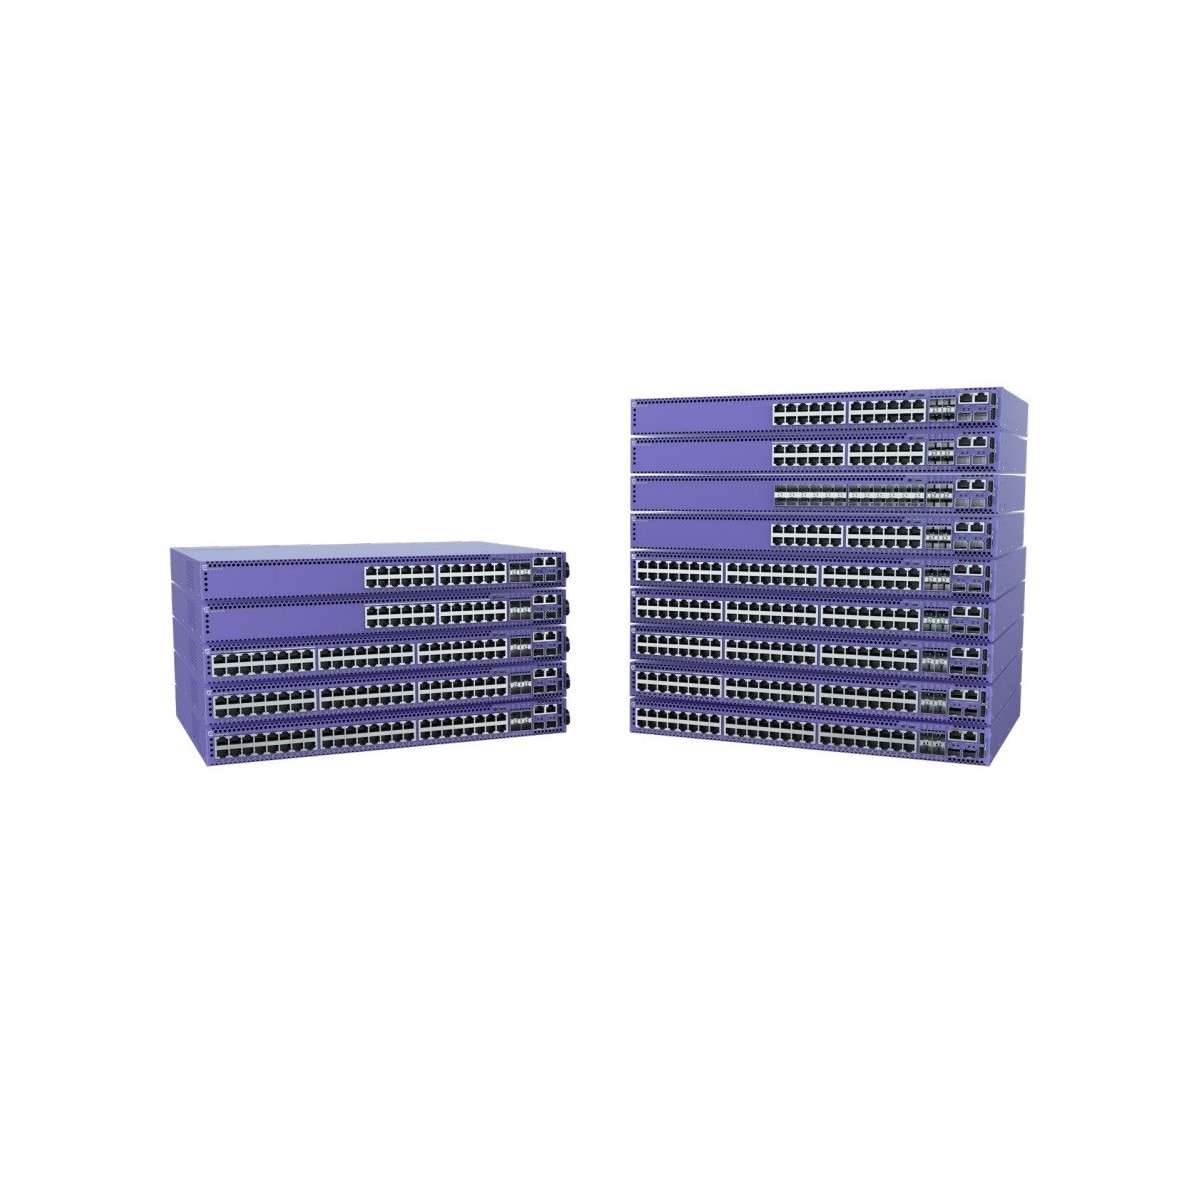 Extreme Networks ExtremeSwitching 5420M 16 - Switch - 1 Gbps